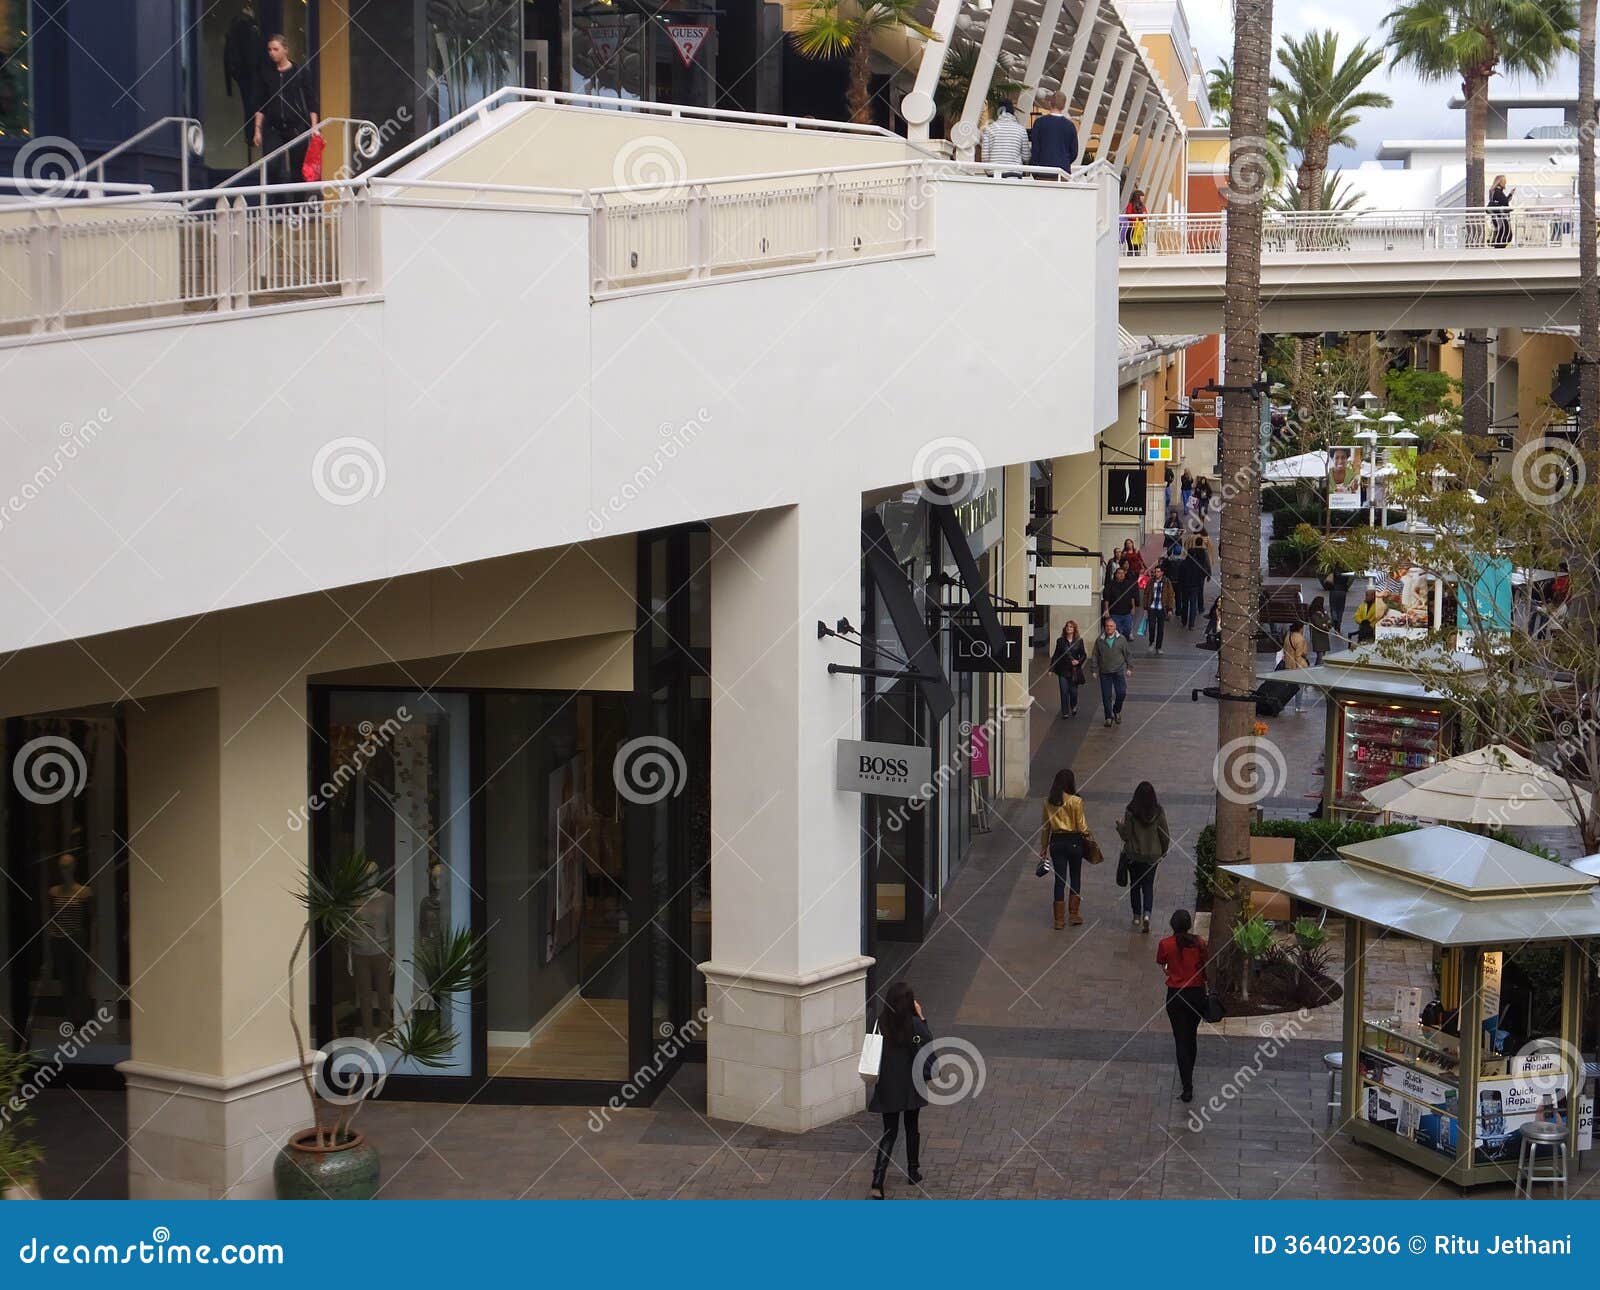 Photos at Fashion Valley - Shopping Mall in San Diego